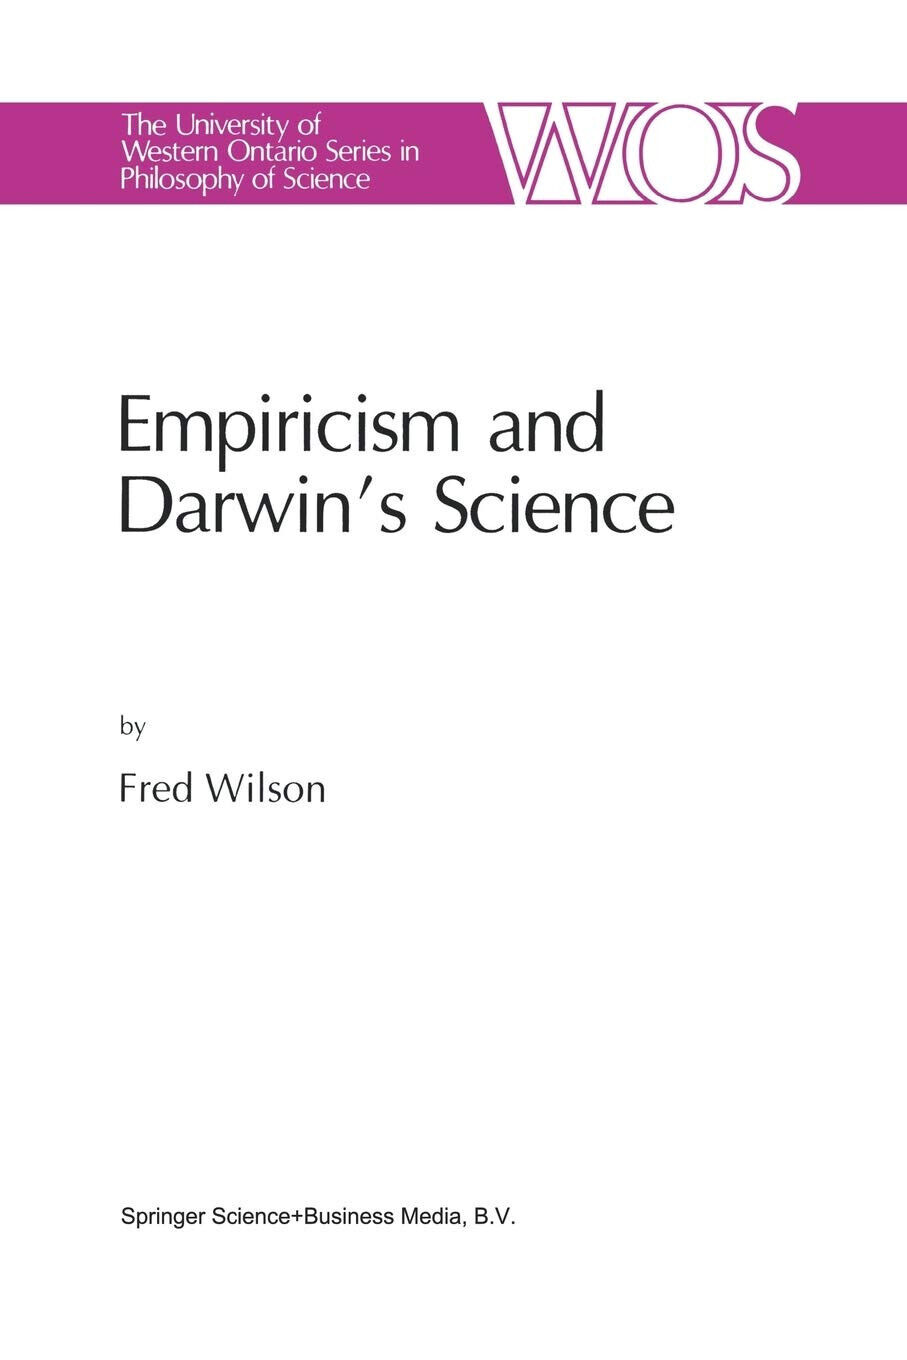 Empiricism and Darwin s Science - F. Wilson - Springer, 1991